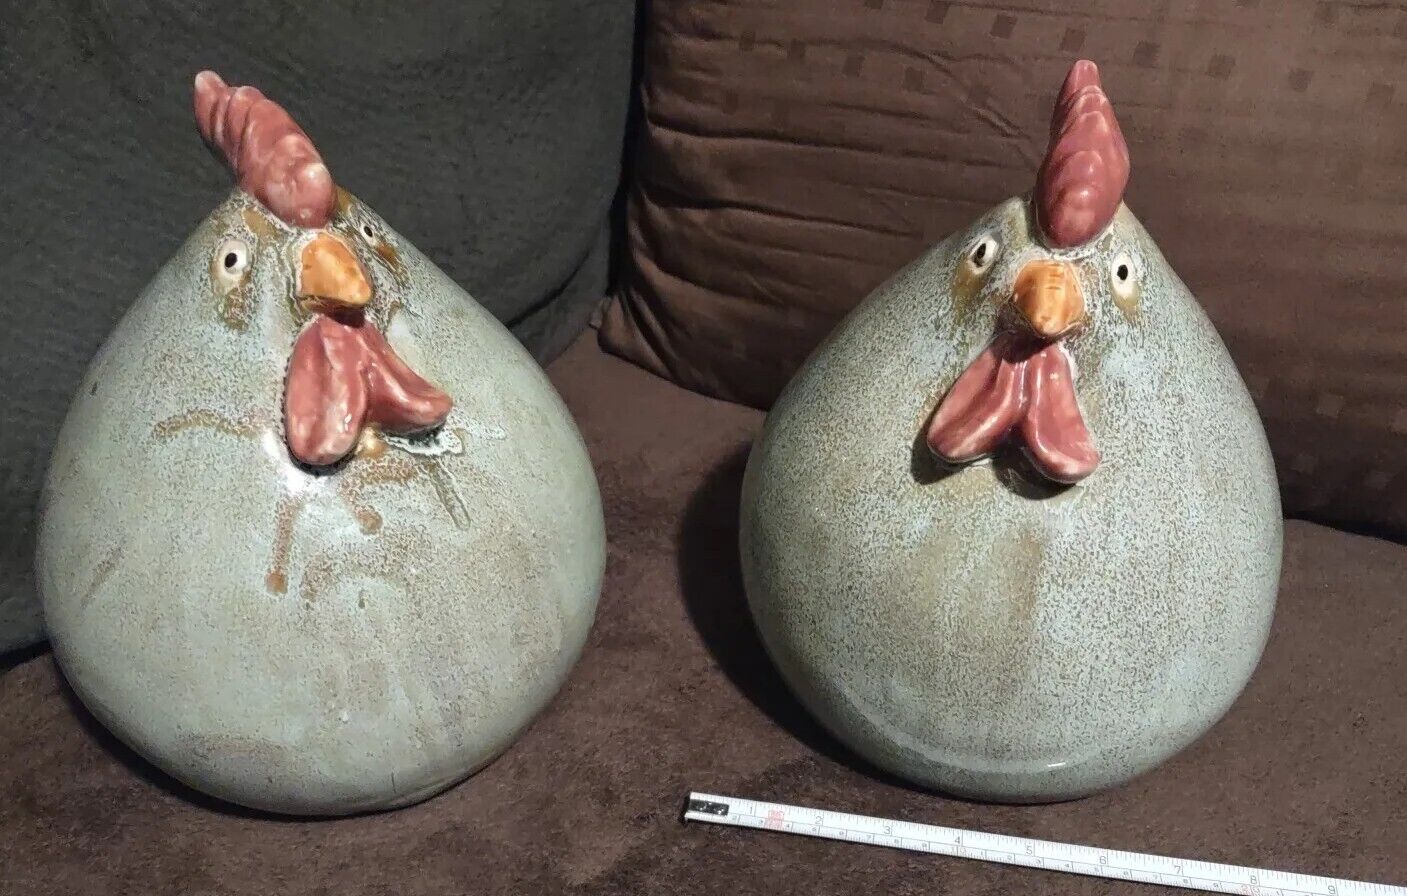 Pair of LARGE Ceramic Green Plump Figurine Chickens for Home Decor in XLNT COND